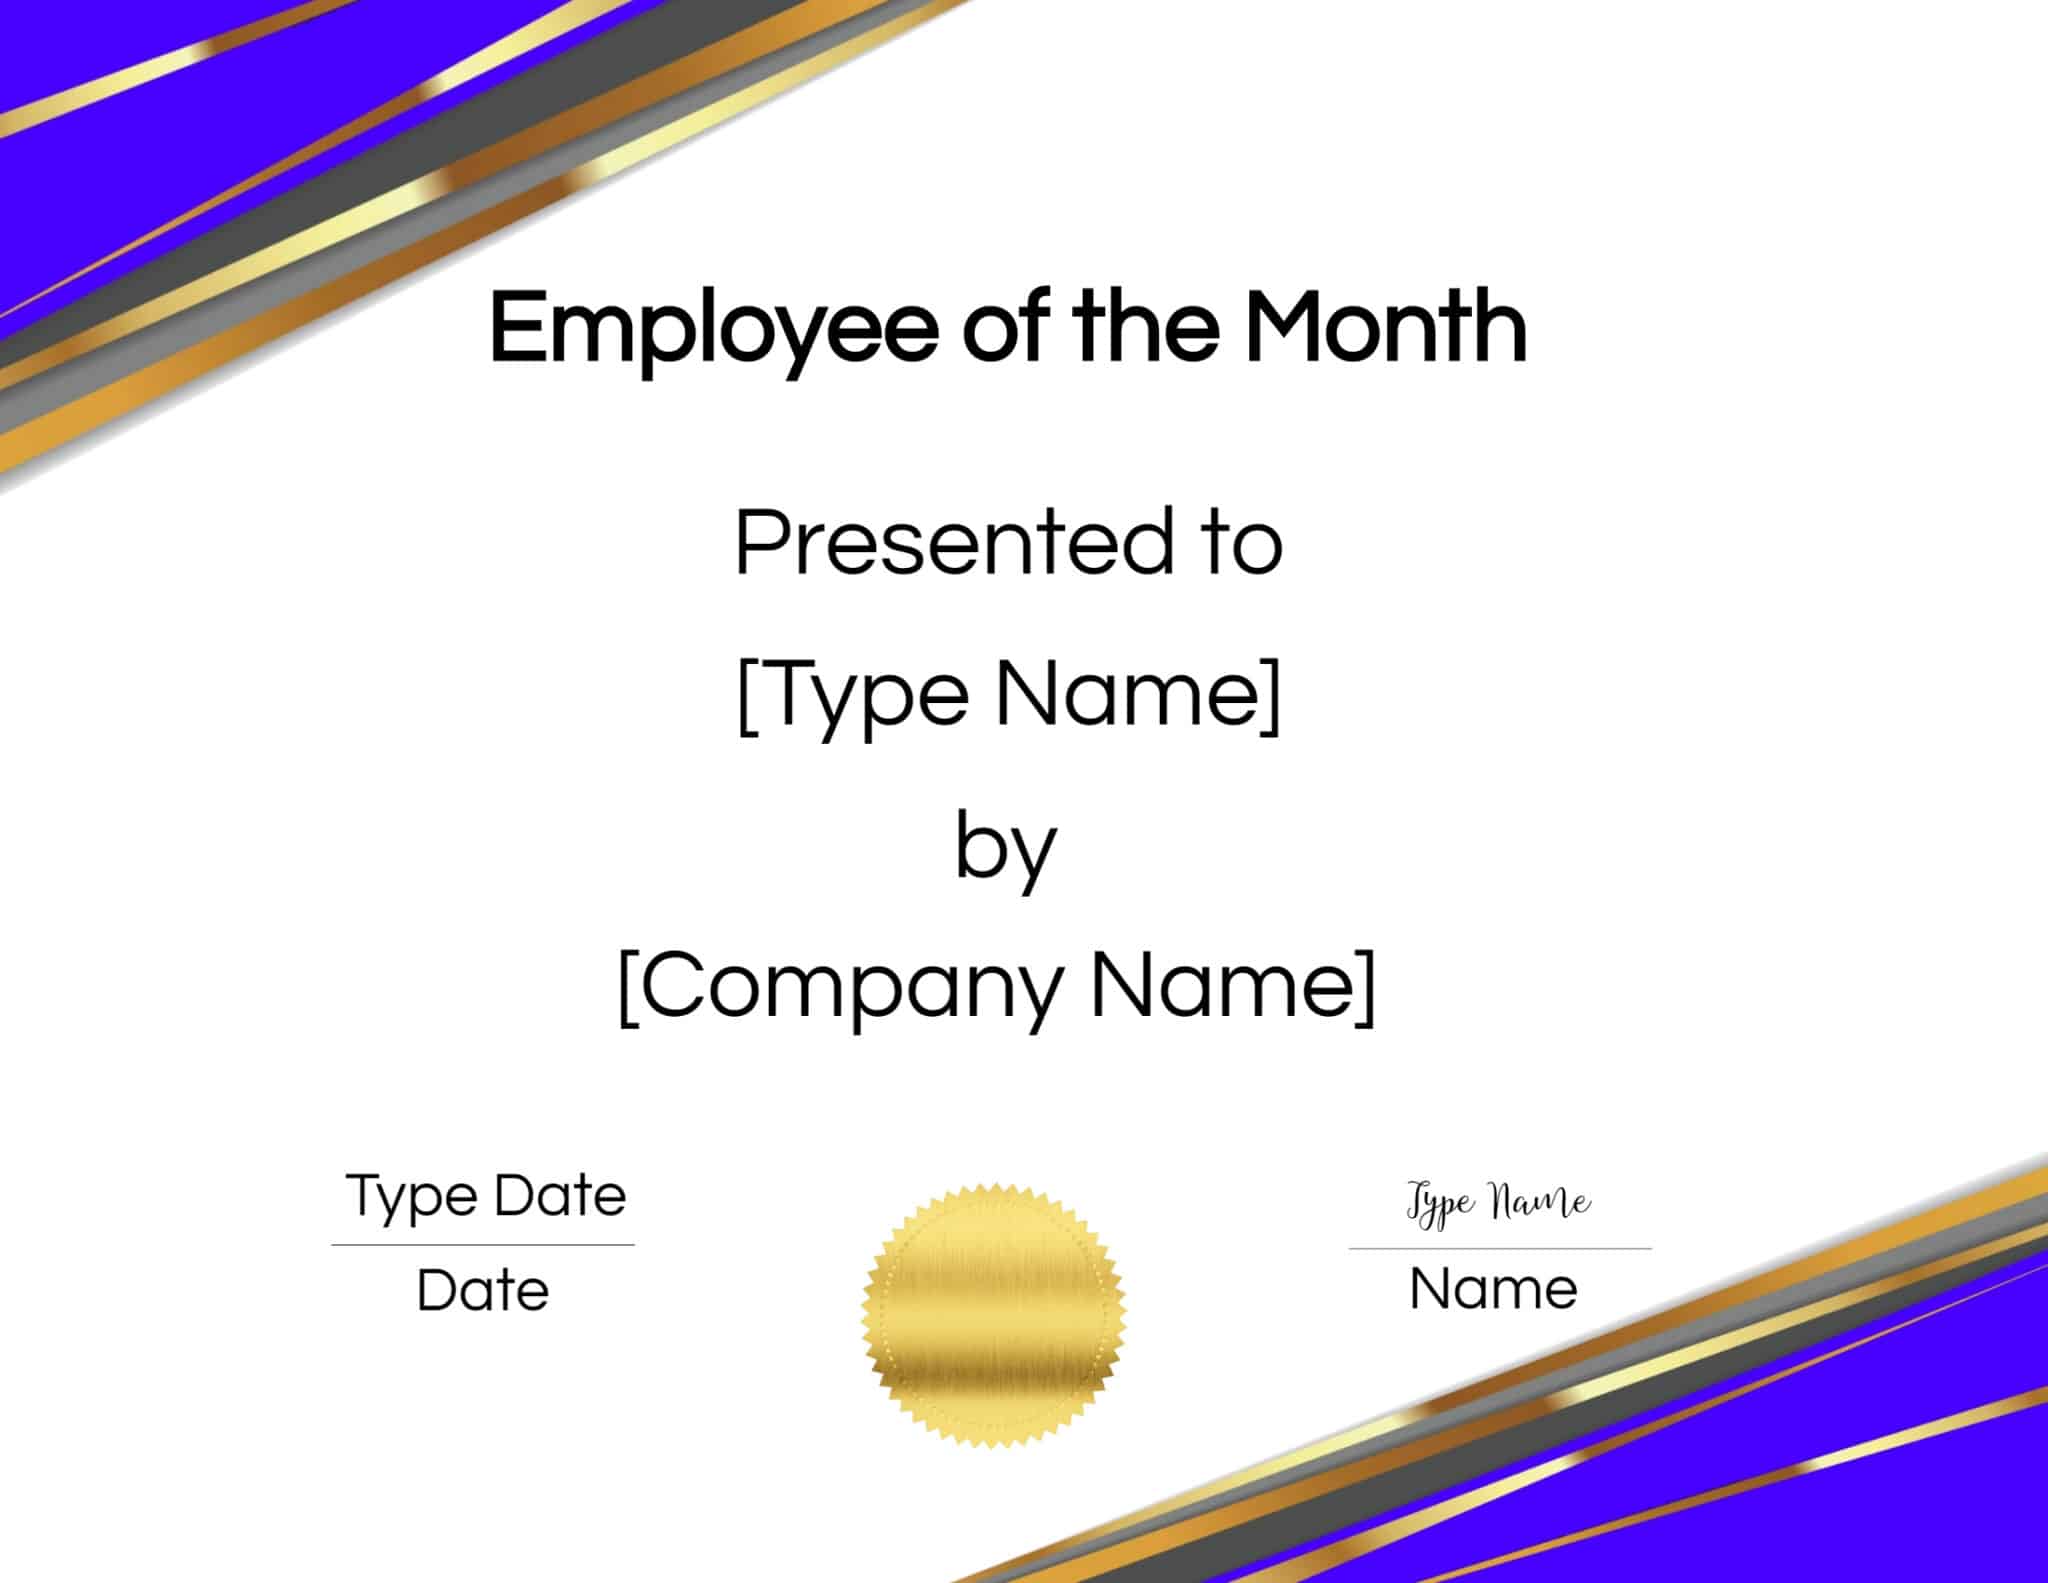 employee-of-the-month-certificate-template-customize-online